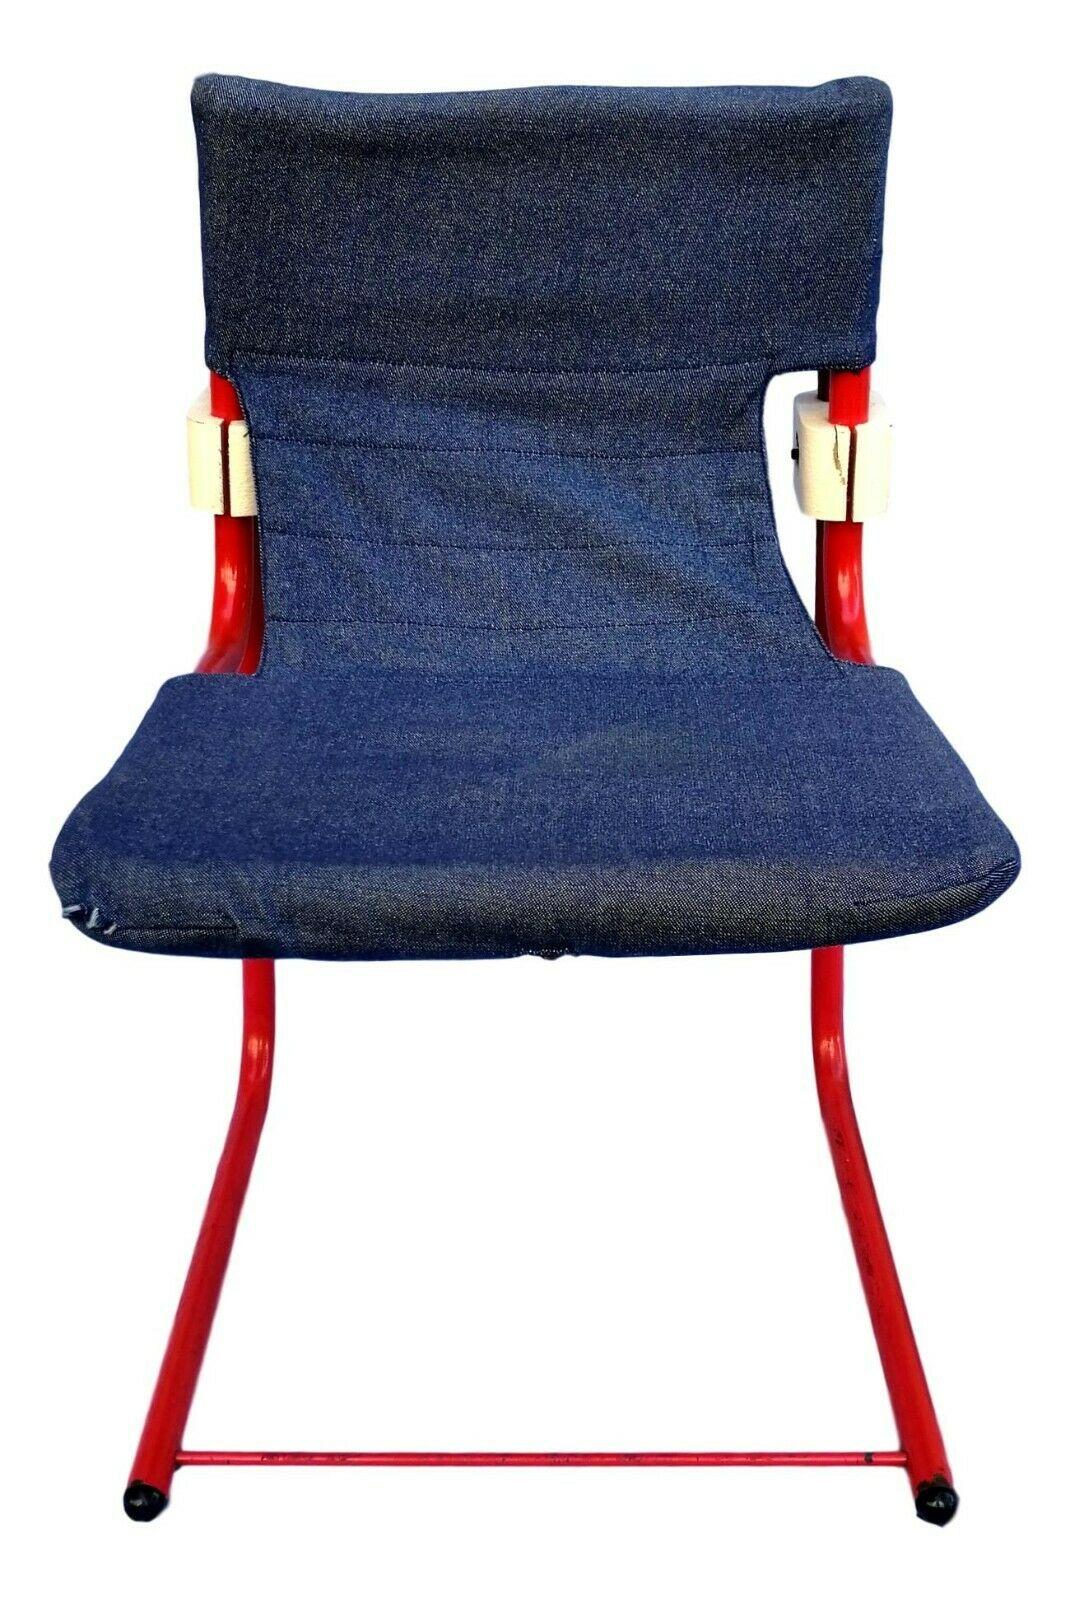 Late 20th Century Vintage Cantilever Chair in Italian Design, Jeans Covered, 1970s